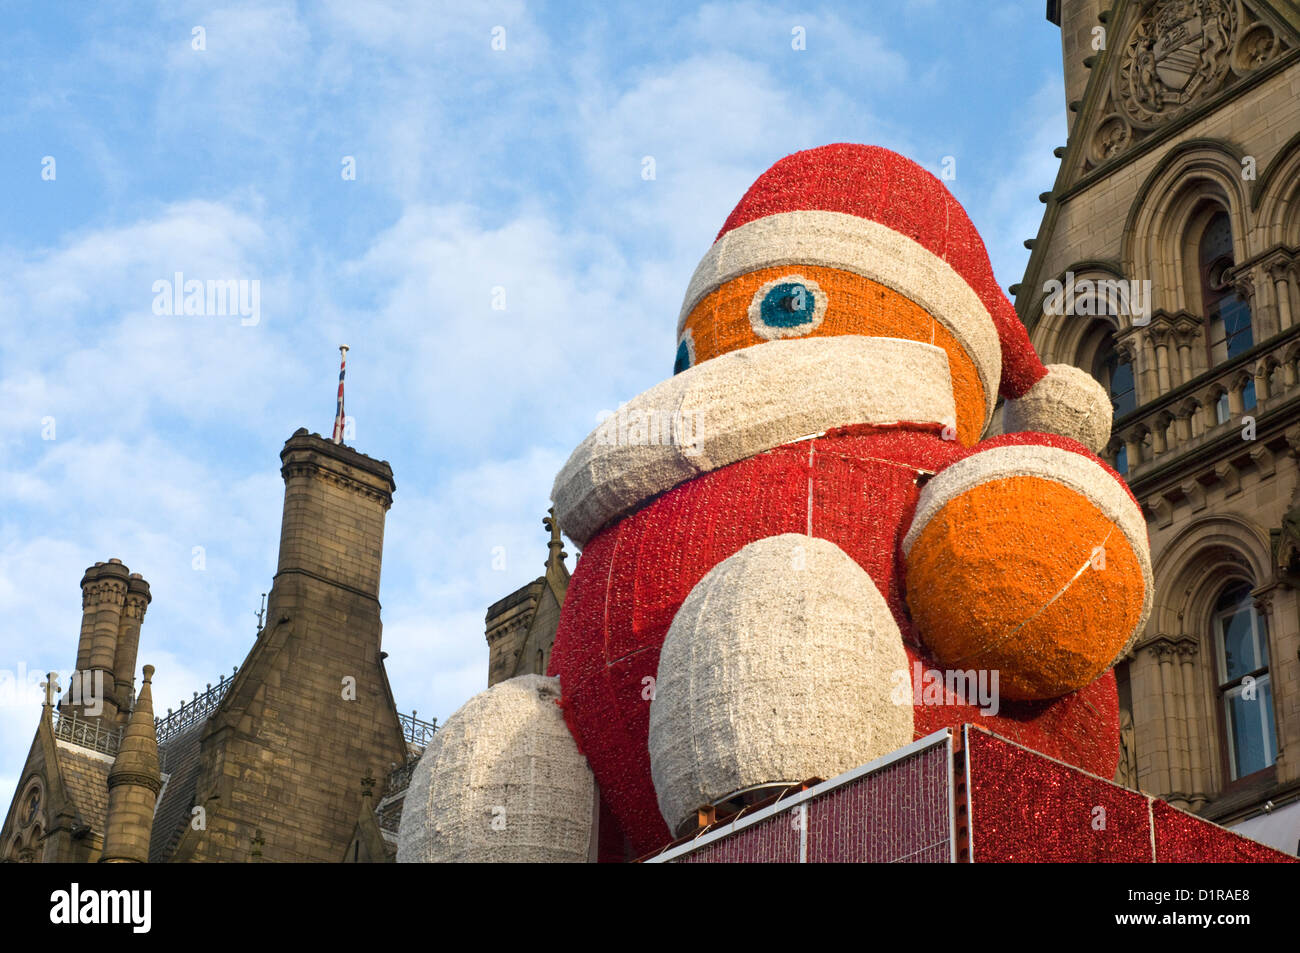 Giant Santa figure outside Manchester town hall in Albert Square, England, UK Stock Photo